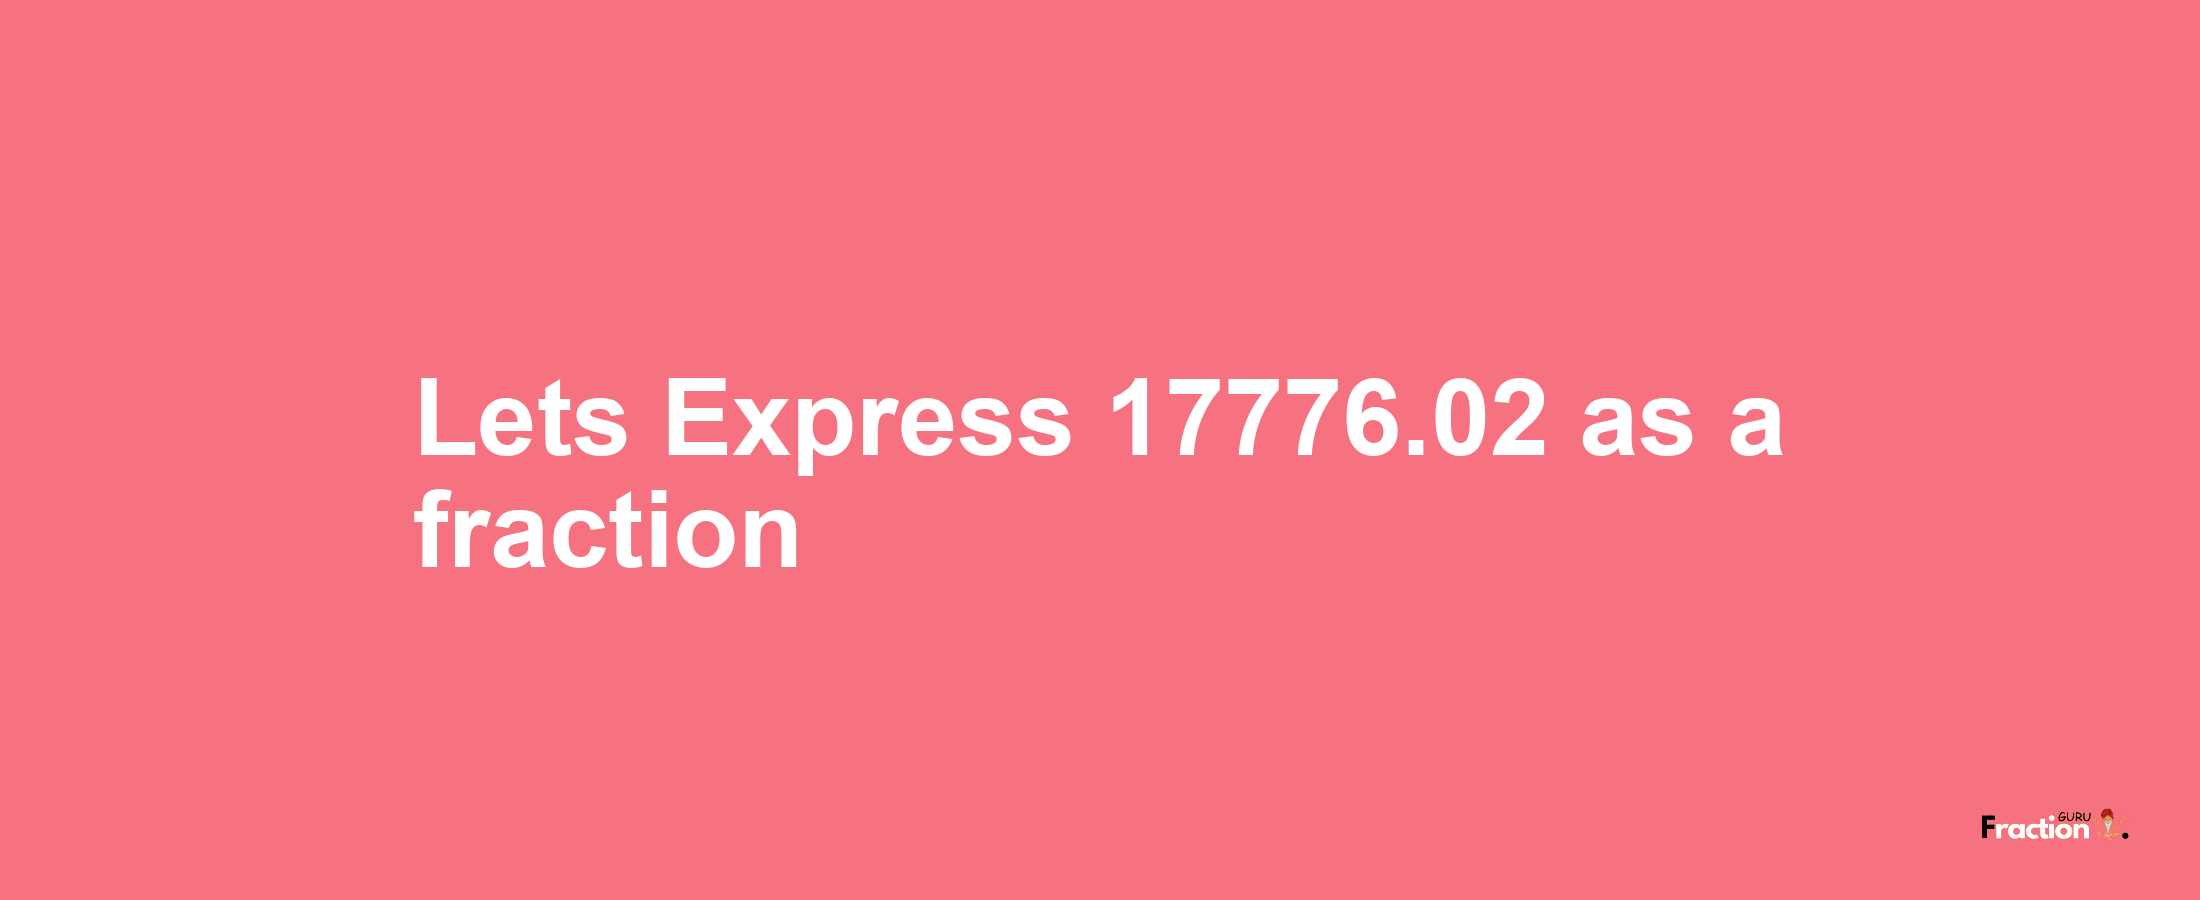 Lets Express 17776.02 as afraction